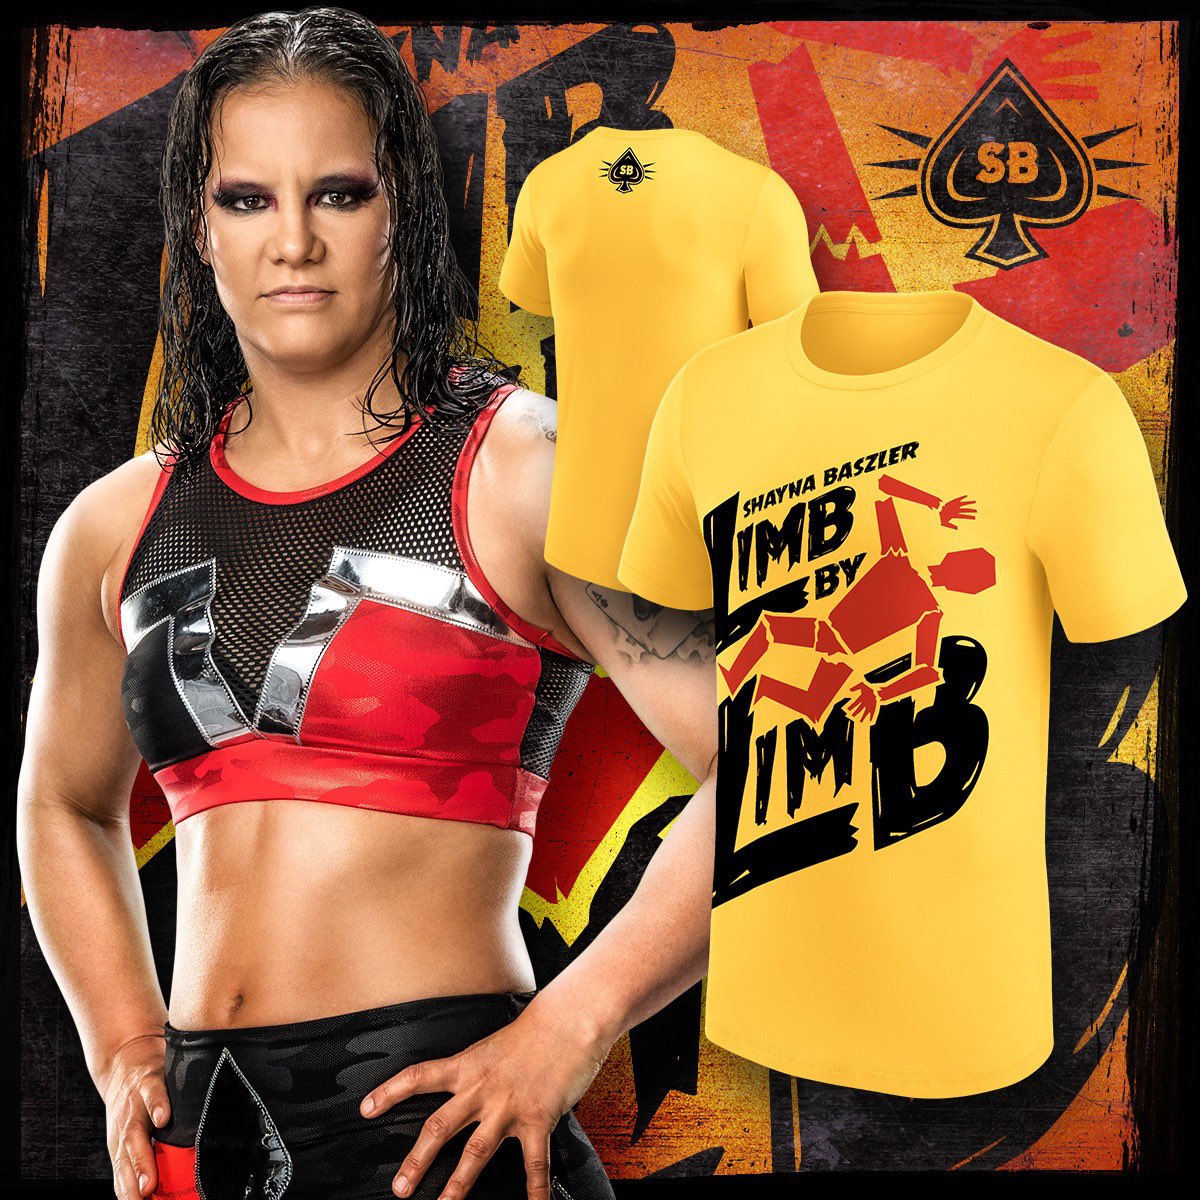 Shayna Baszler 'Limb by Limb' tee now available at #WWEShop! #WWE 🛒: bit.ly/3si1MAc